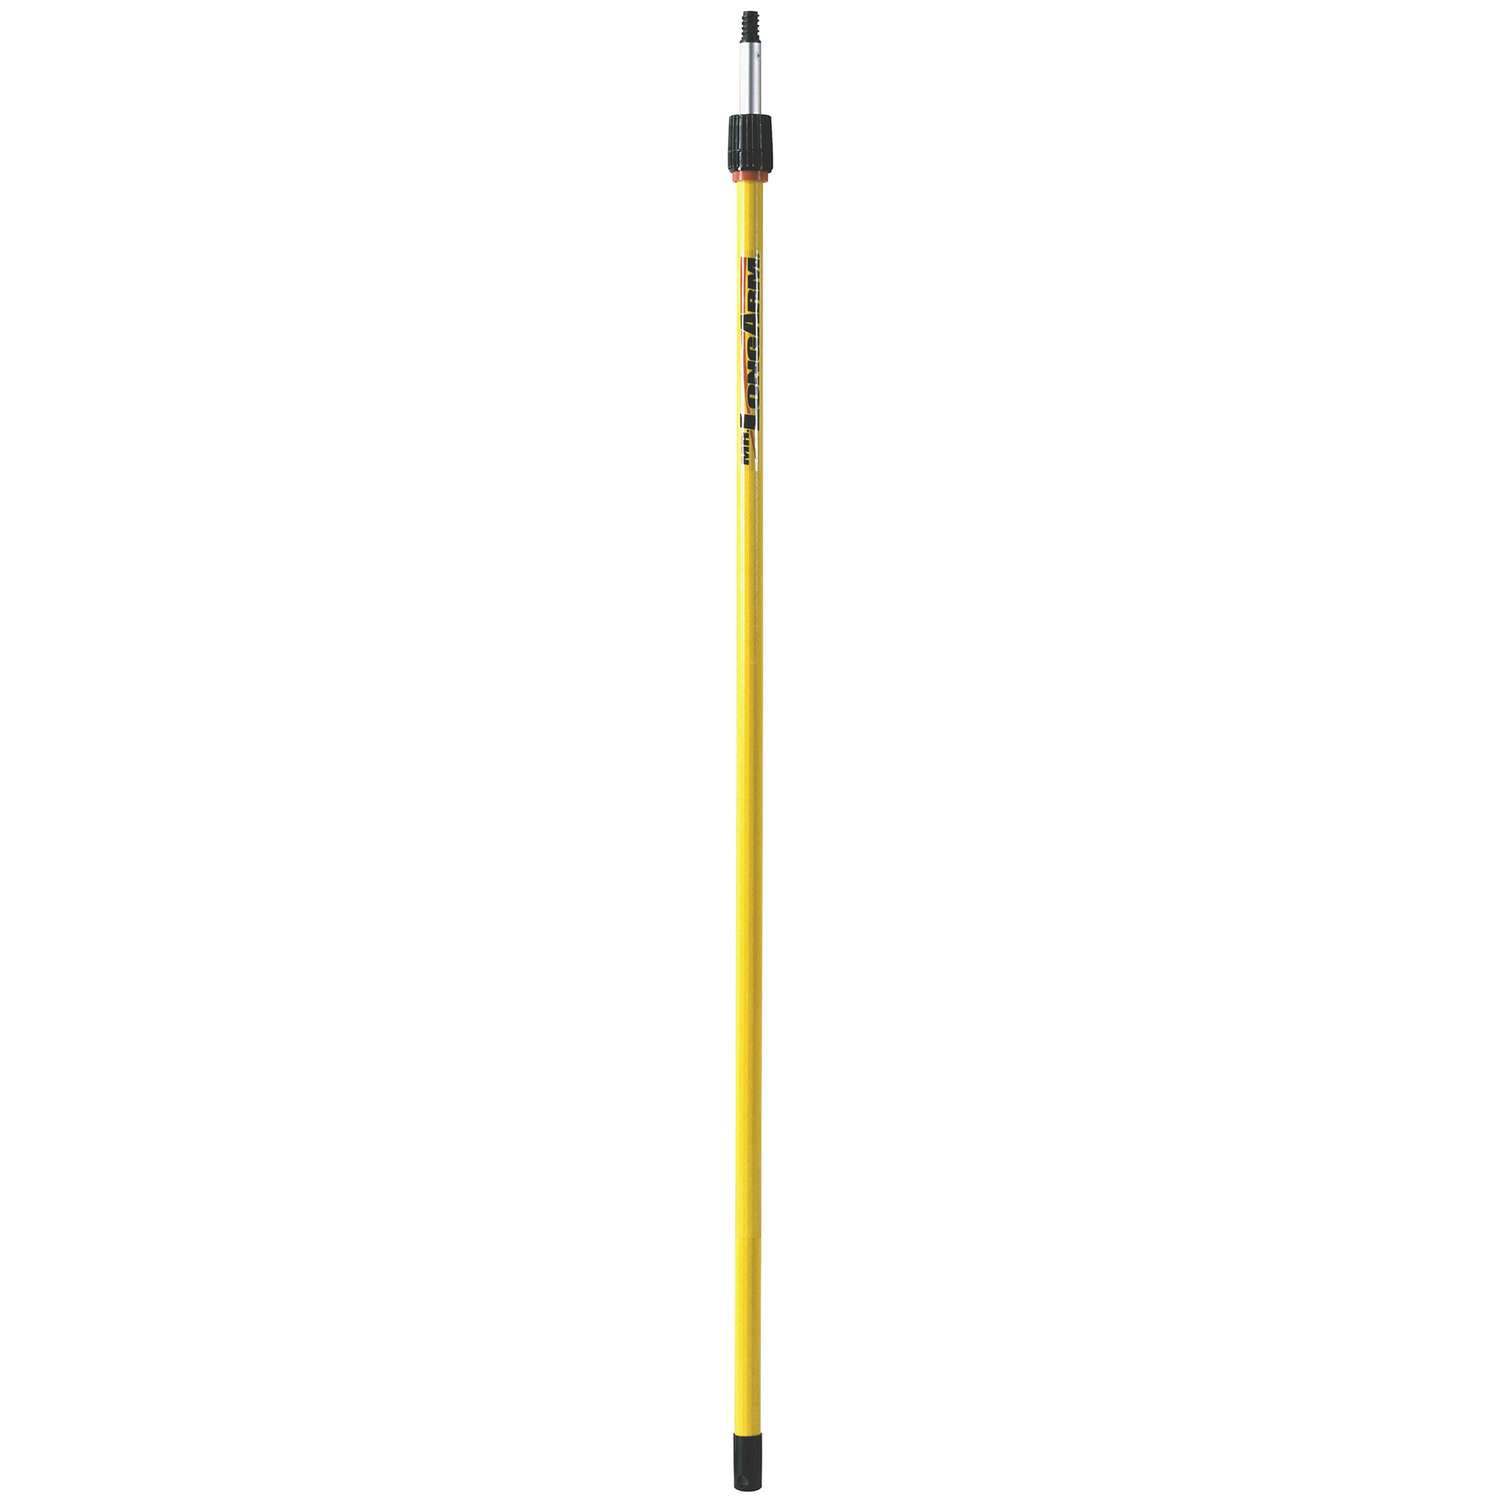 Mr LongArm 3212 Pro-Pole Extension Pole 6-to-12 Foot 